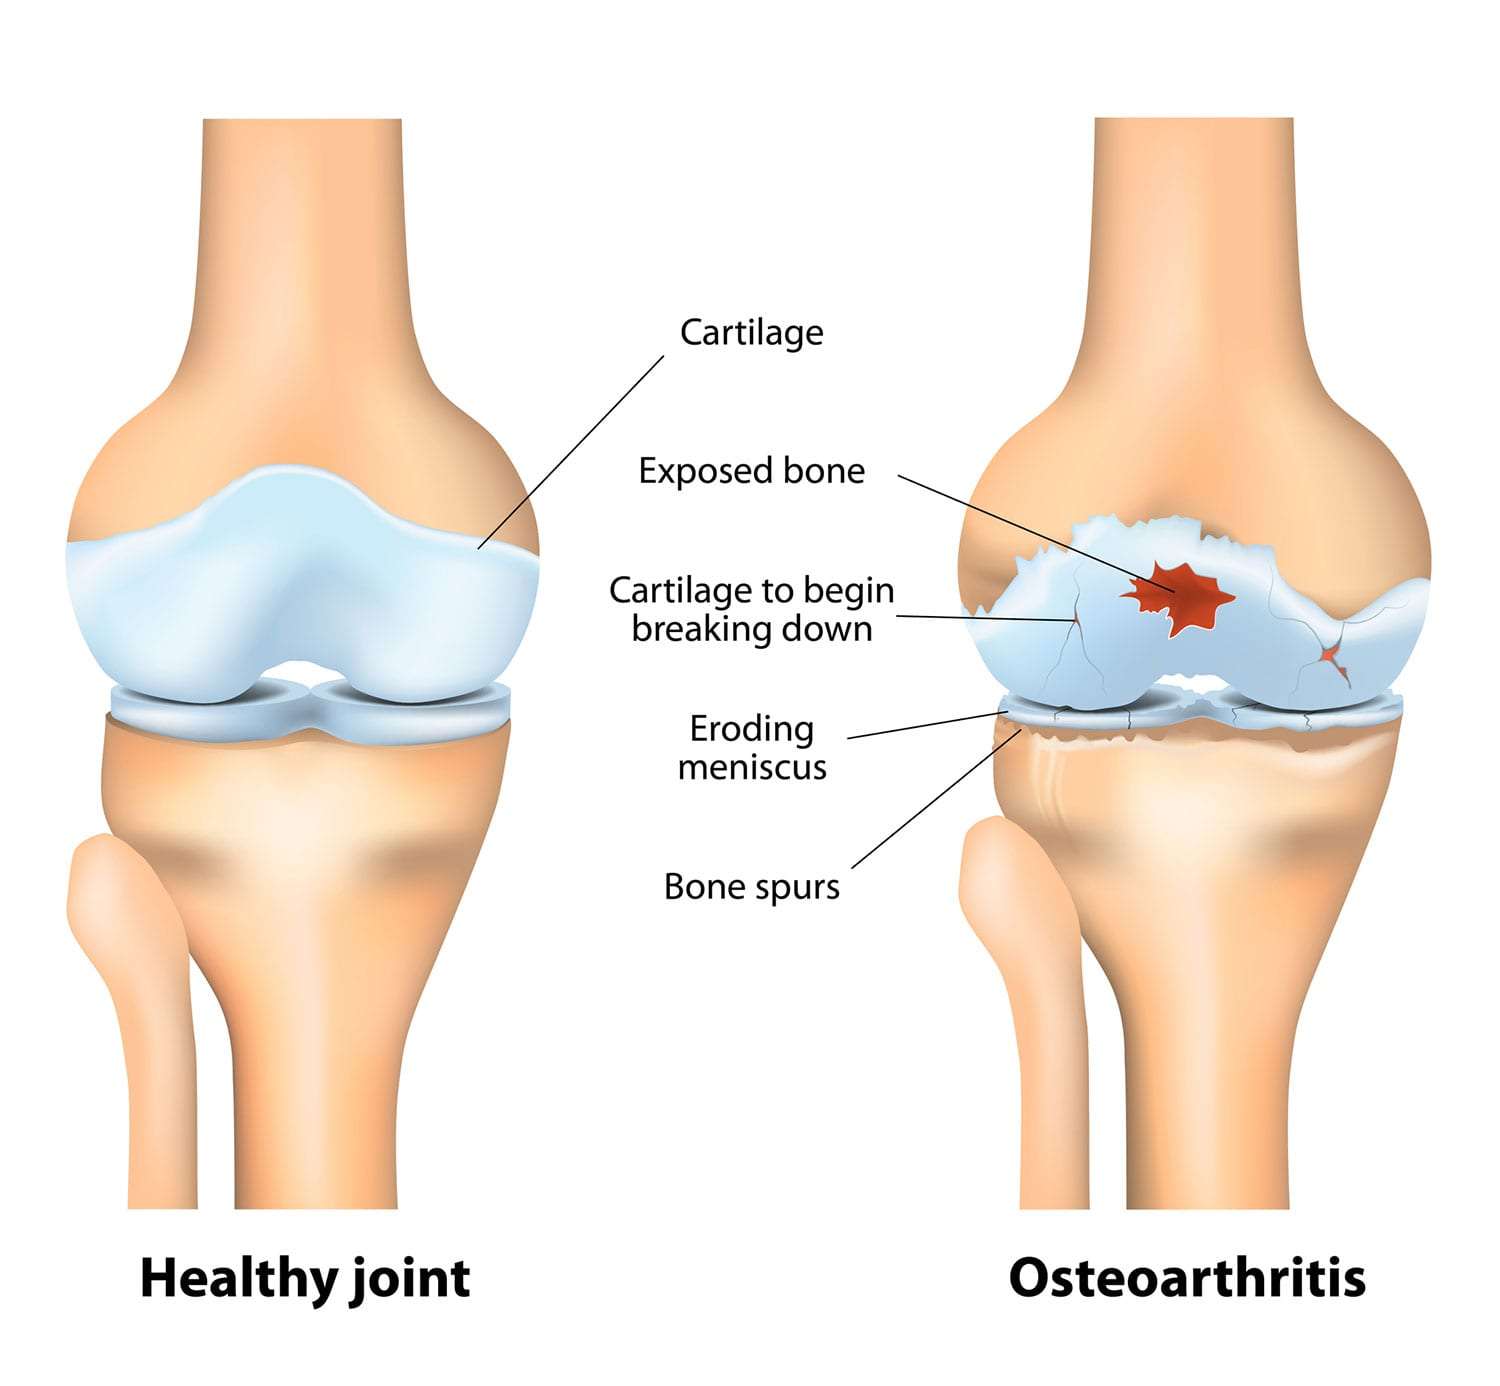 Arthritis or arthrosis - that is the question? An overview of concept in osteoarthritis.